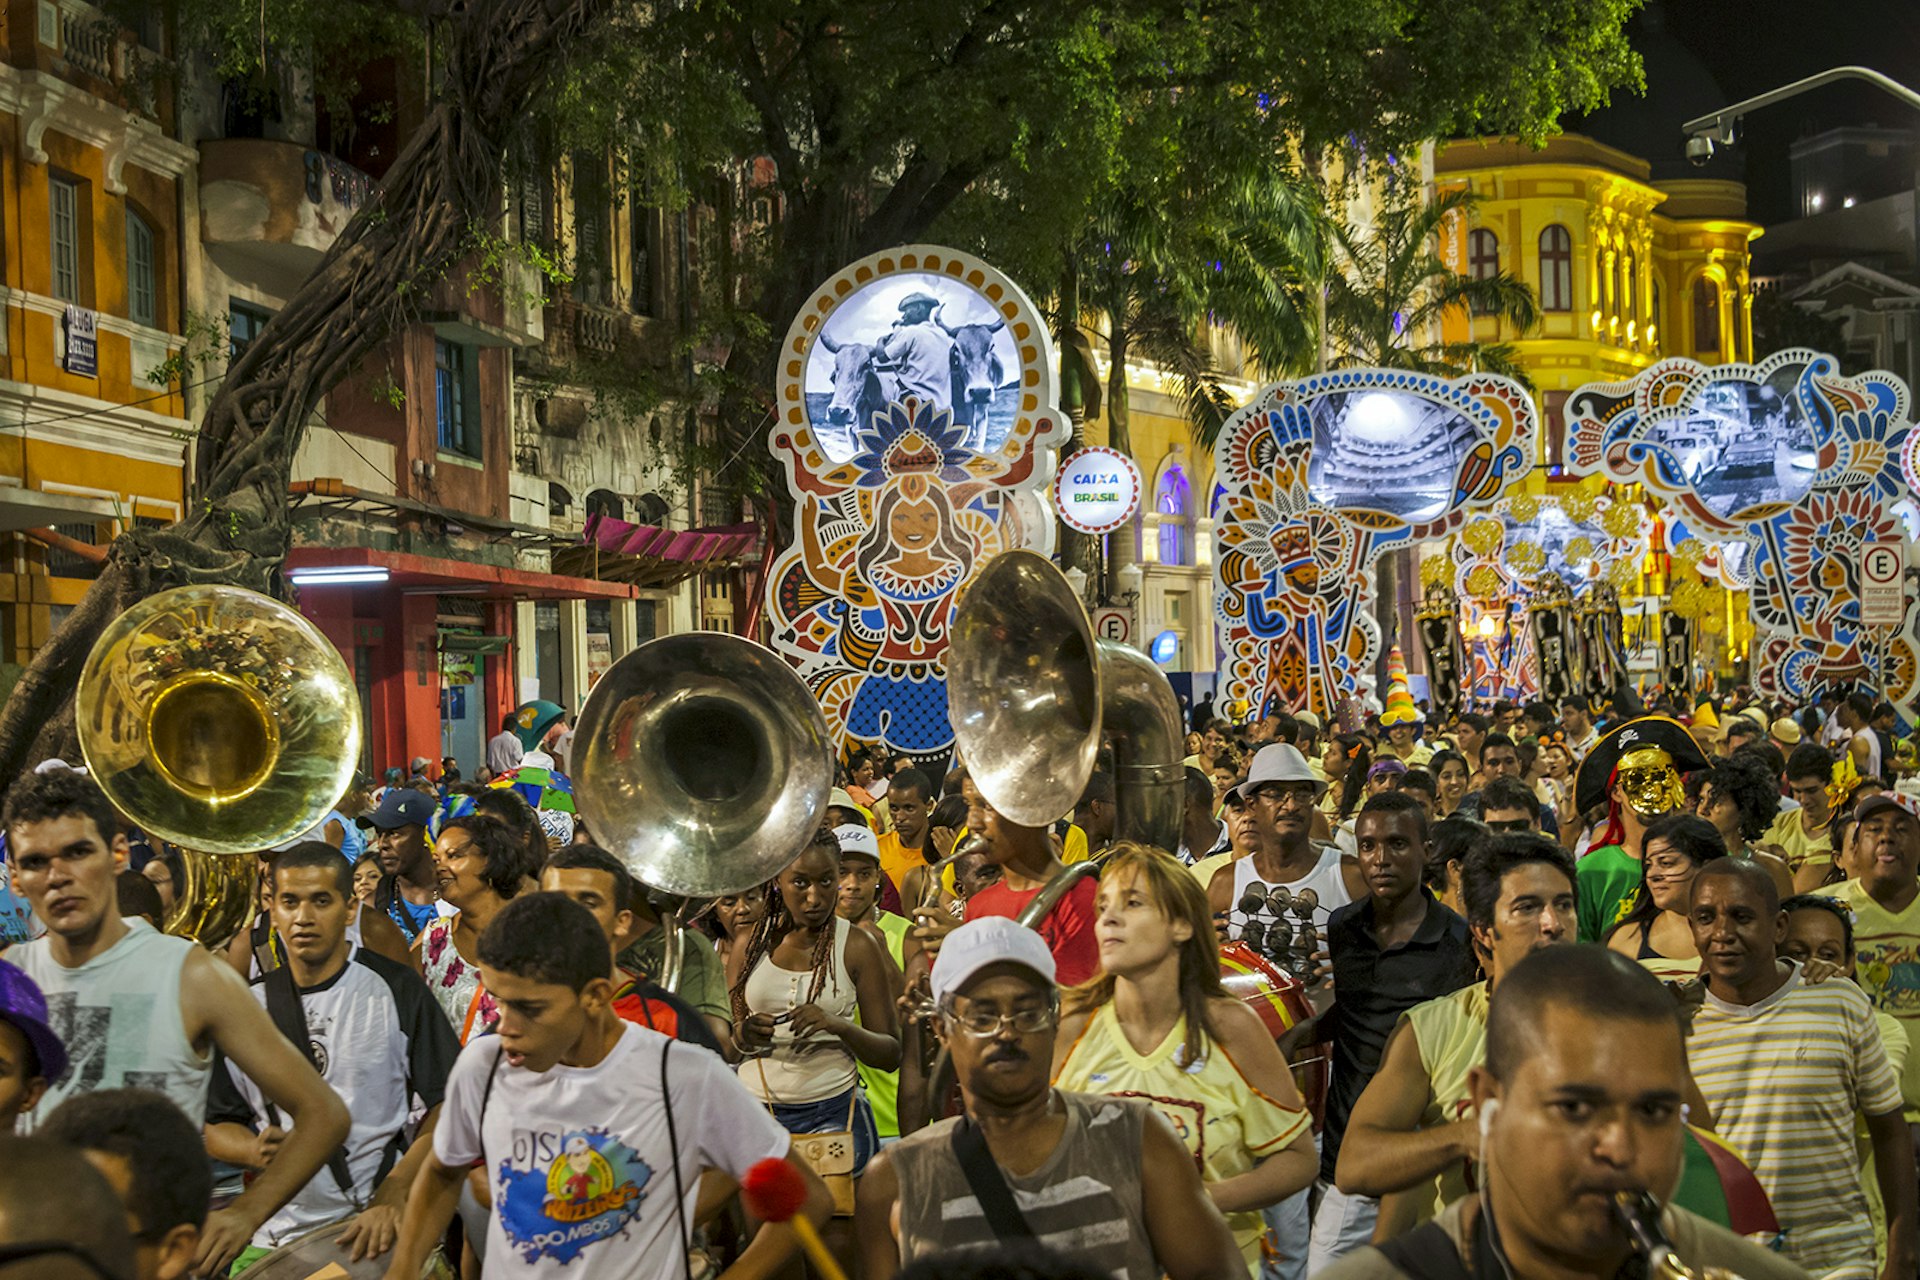 A group of people led by those holding tubas walking down a colorful street, holding thematic parade signs